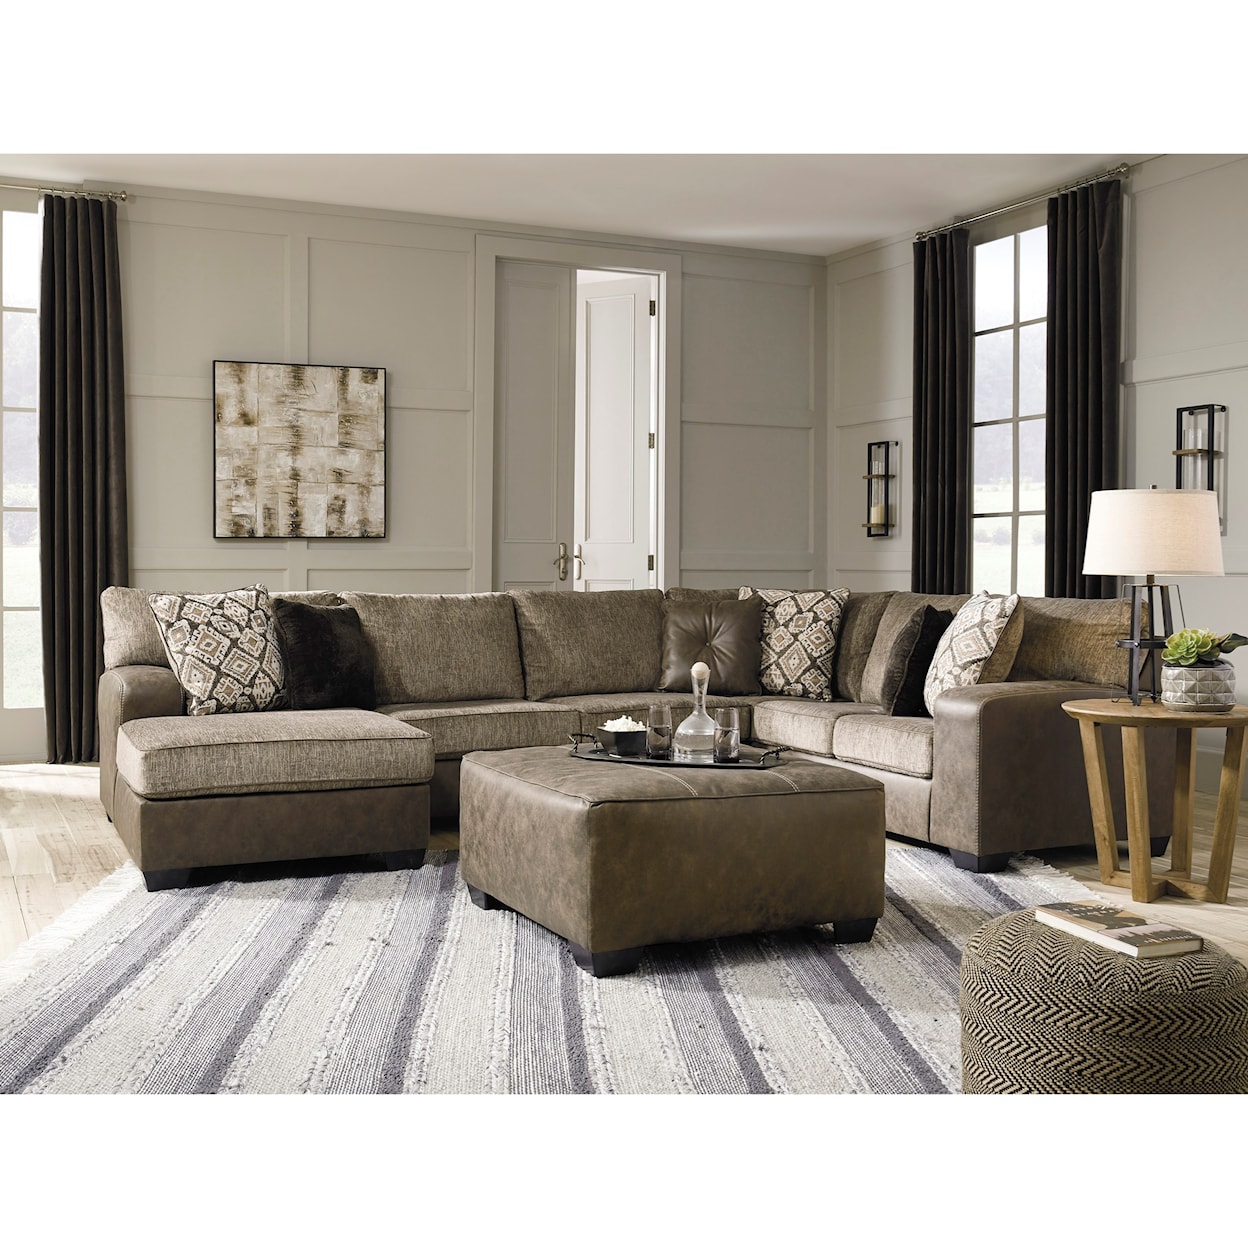 Benchcraft Abalone 3pc Sectional and ottoman 